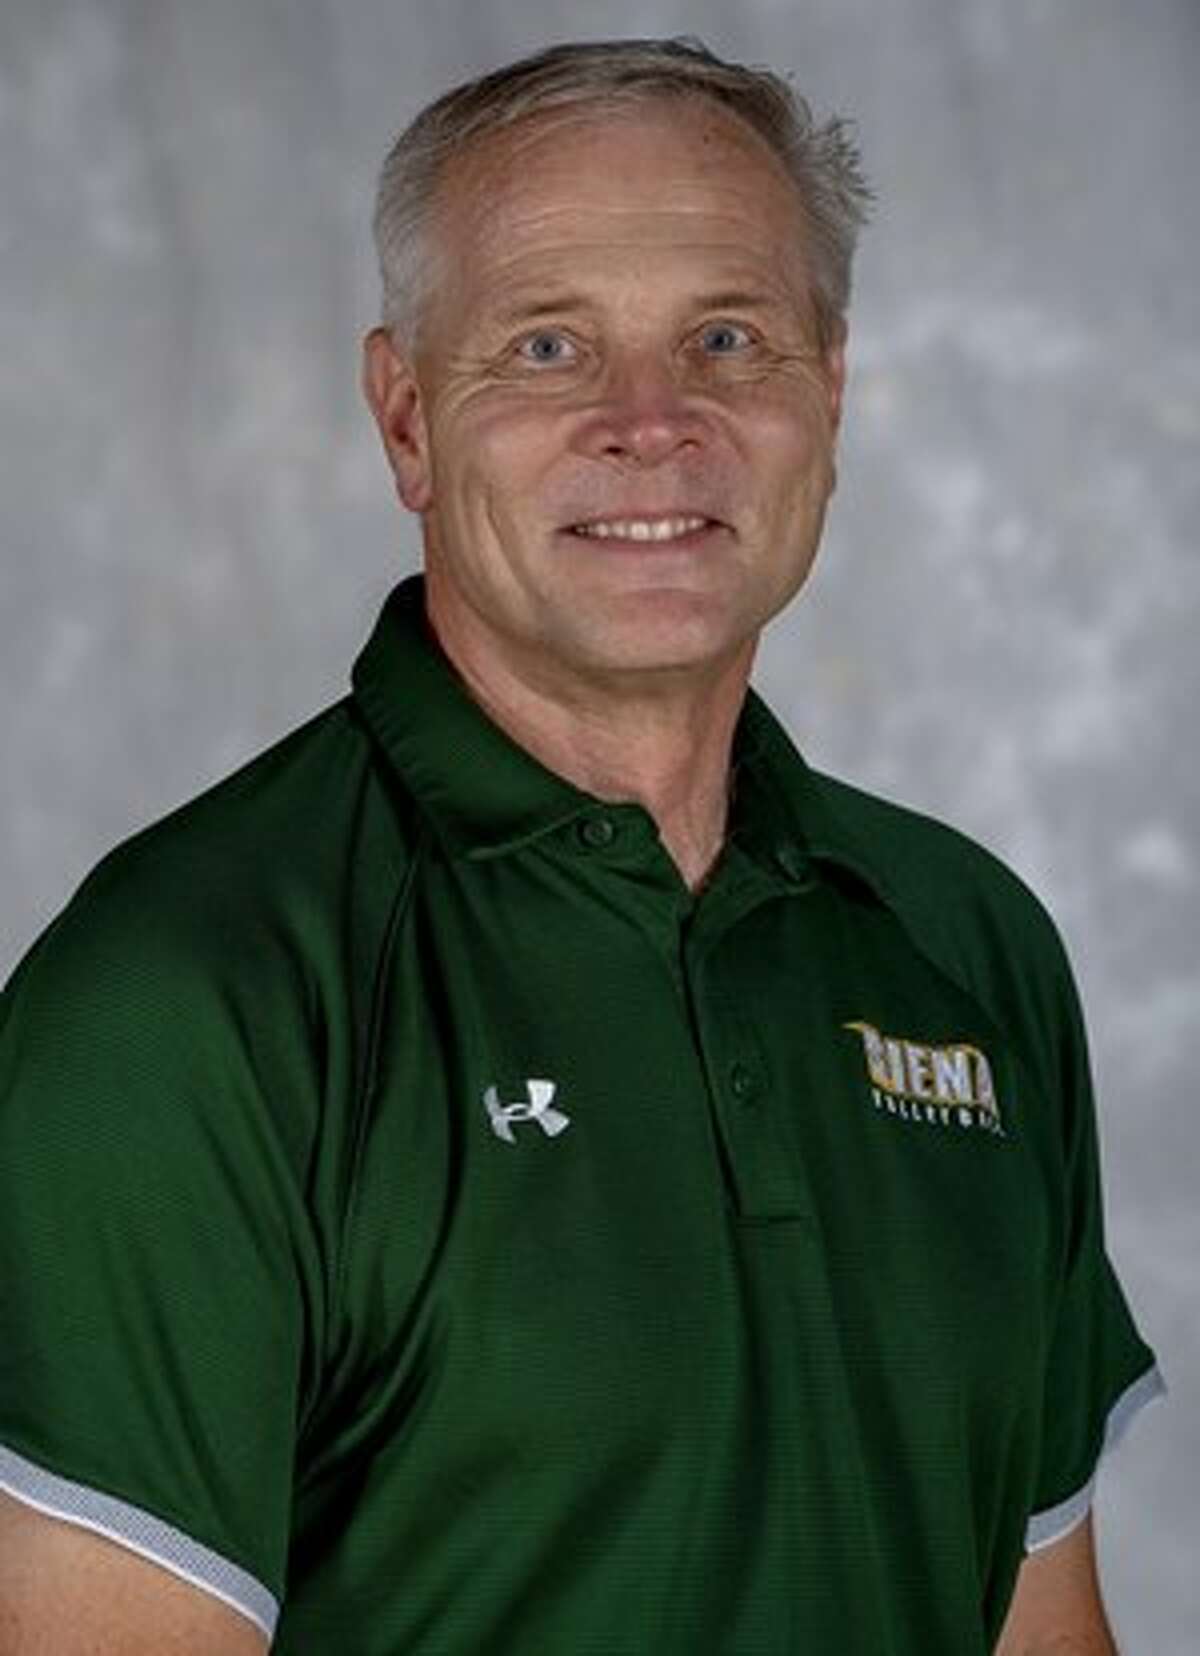 Vilis Ozols went 23-76 in his four seasons as Siena volleyball coach. The Saints announced on Dec. 8, 2021, they're making a change.